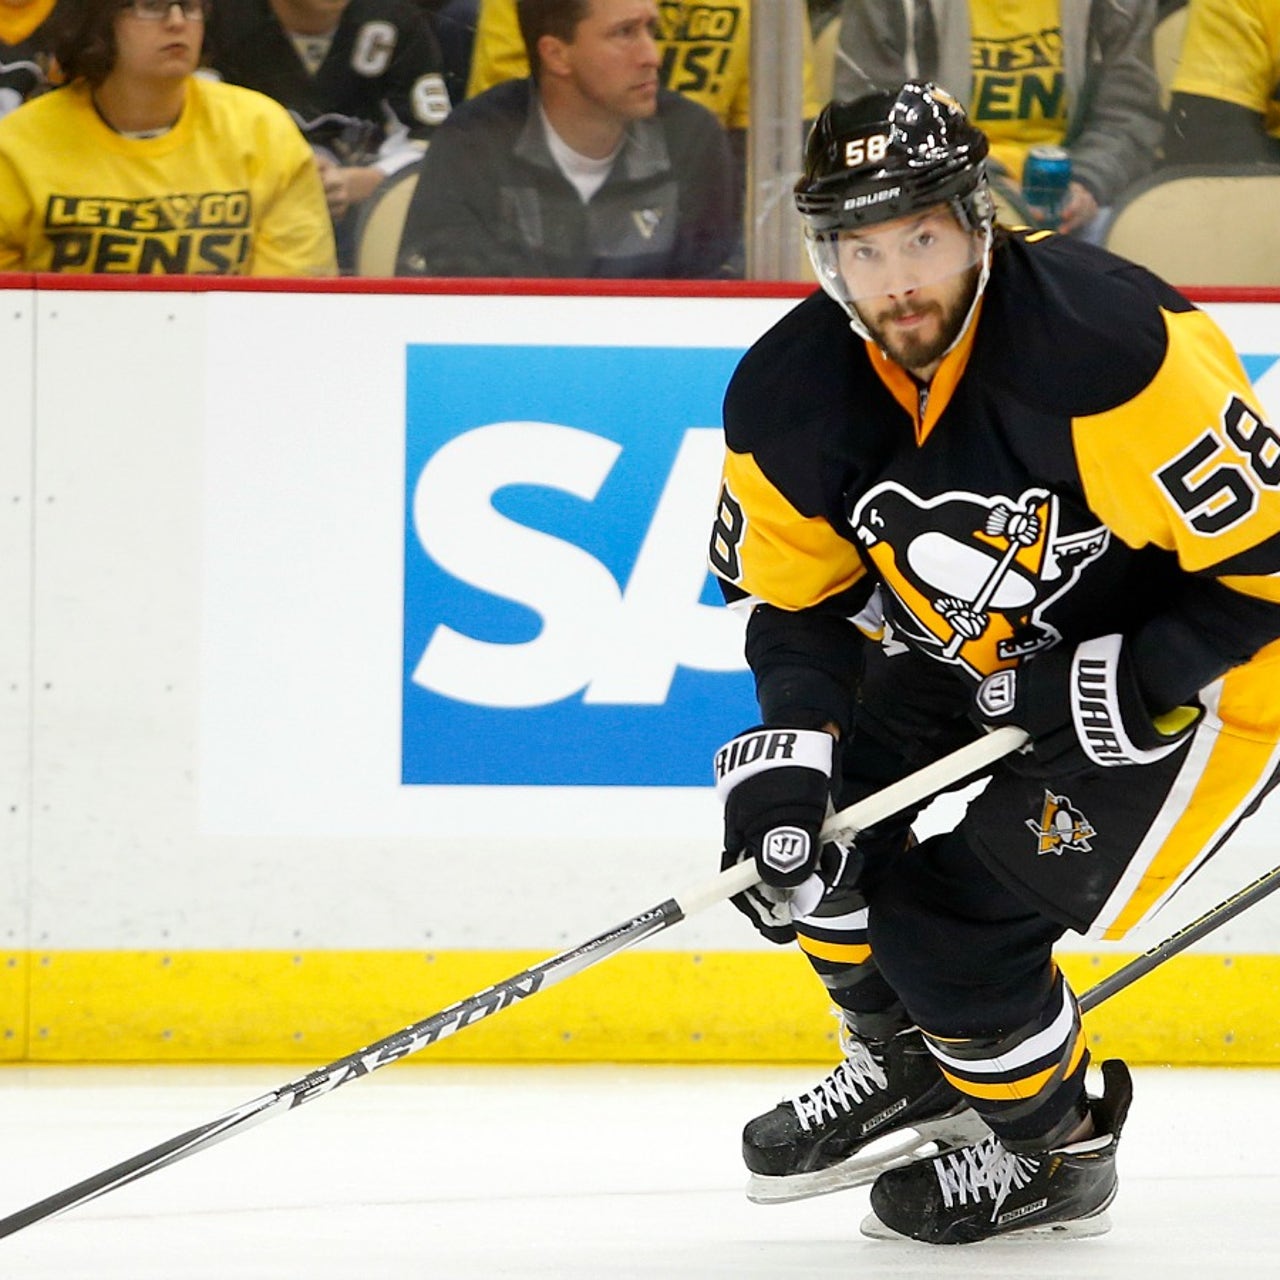 Kris Letang Returns to the Red Hot Pittsburgh Penguins - The